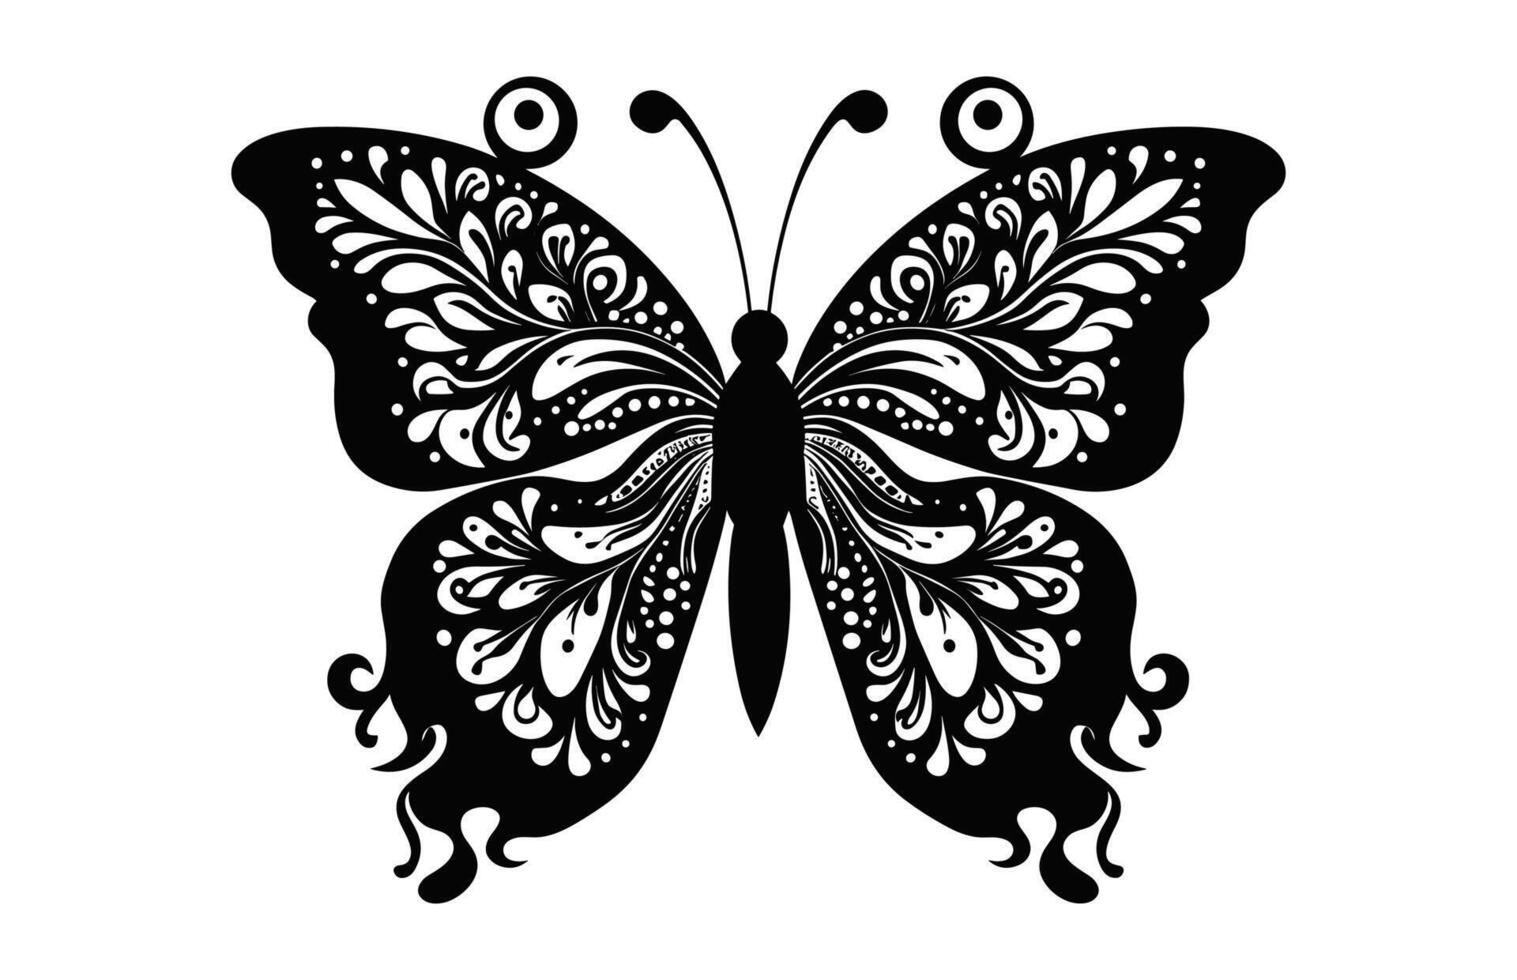 Butterfly Mandala black and white Silhouette Clipart vector